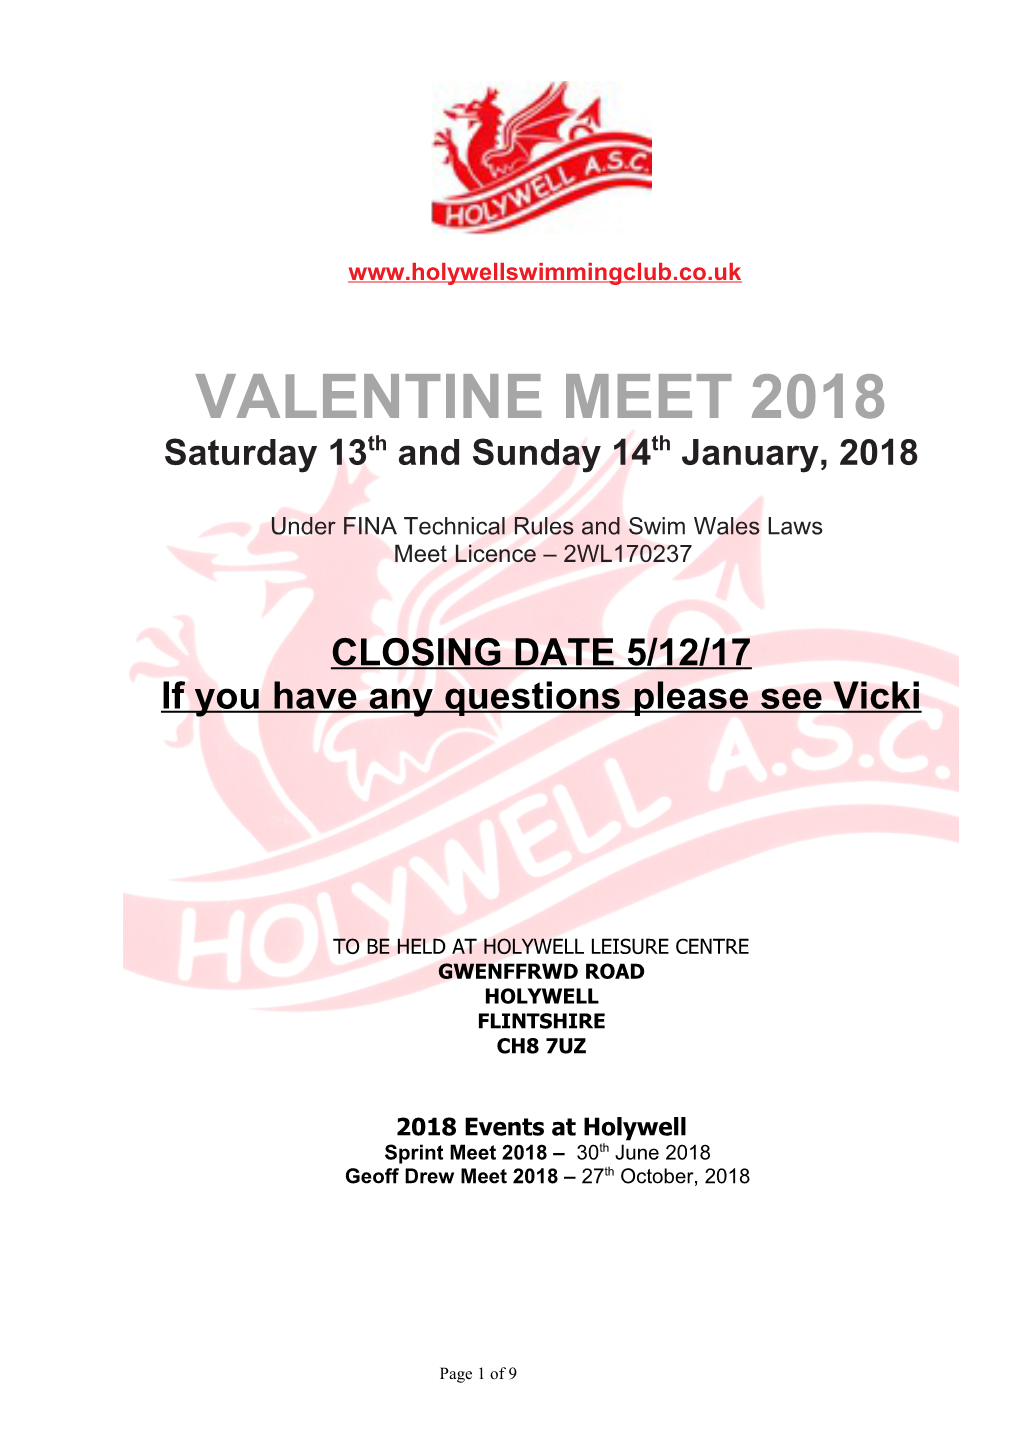 If You Have Any Questions Please See Vicki